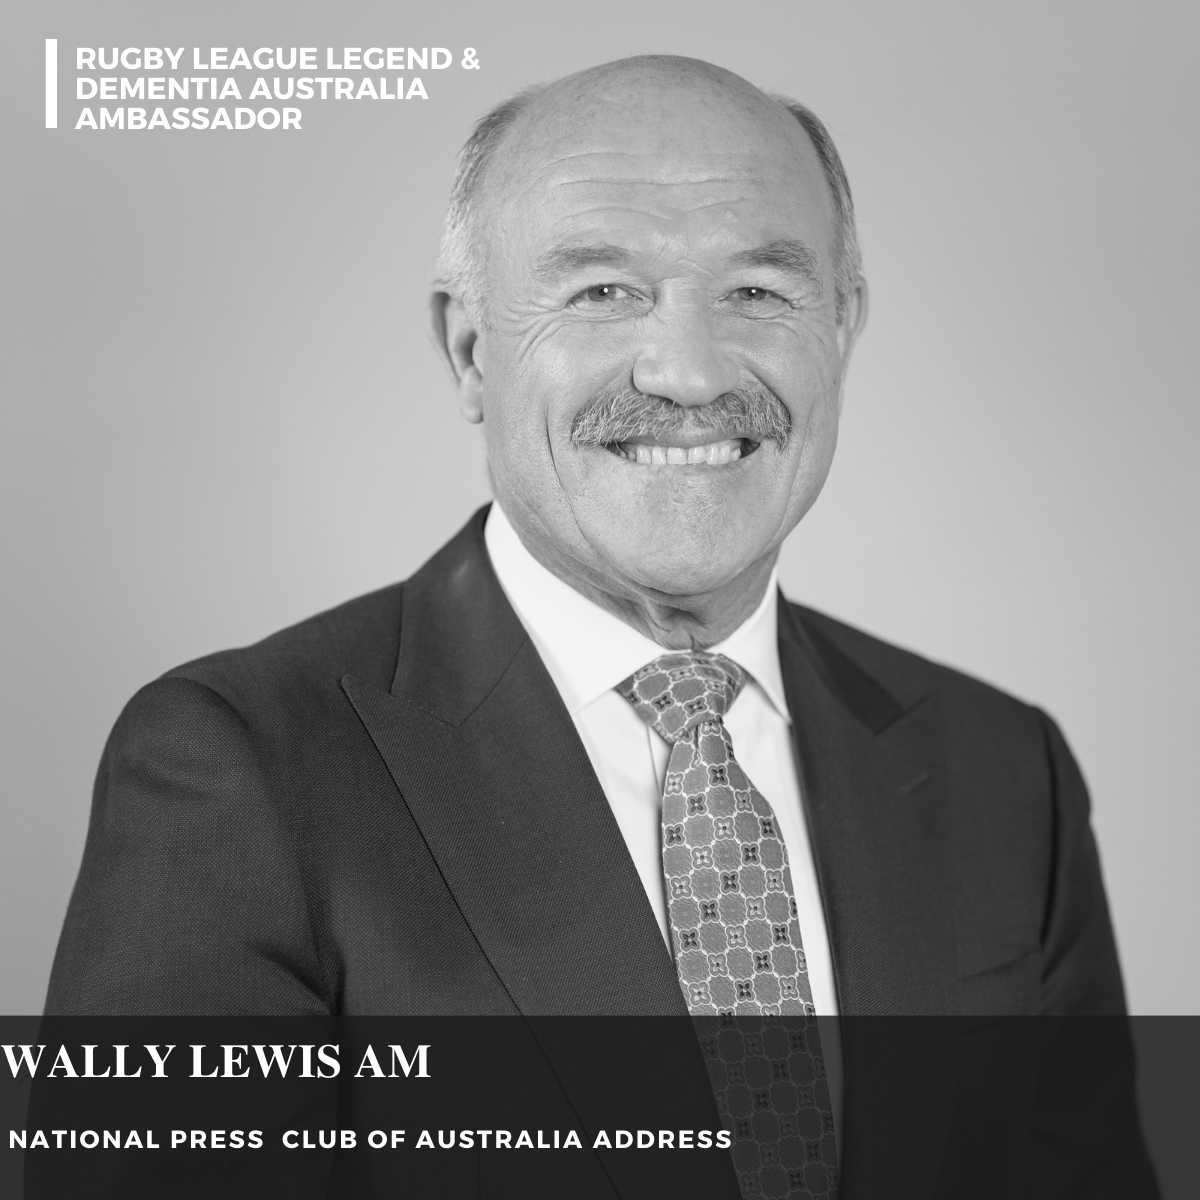 Next Week: Wally Lewis AM, rugby league legend and Dementia Australia Ambassador will address the National Press Club of Australia on 'Living with probable CTE and my hopes for change'. Join us Tuesday 23rd April. Purchase tickets now link in Bio.